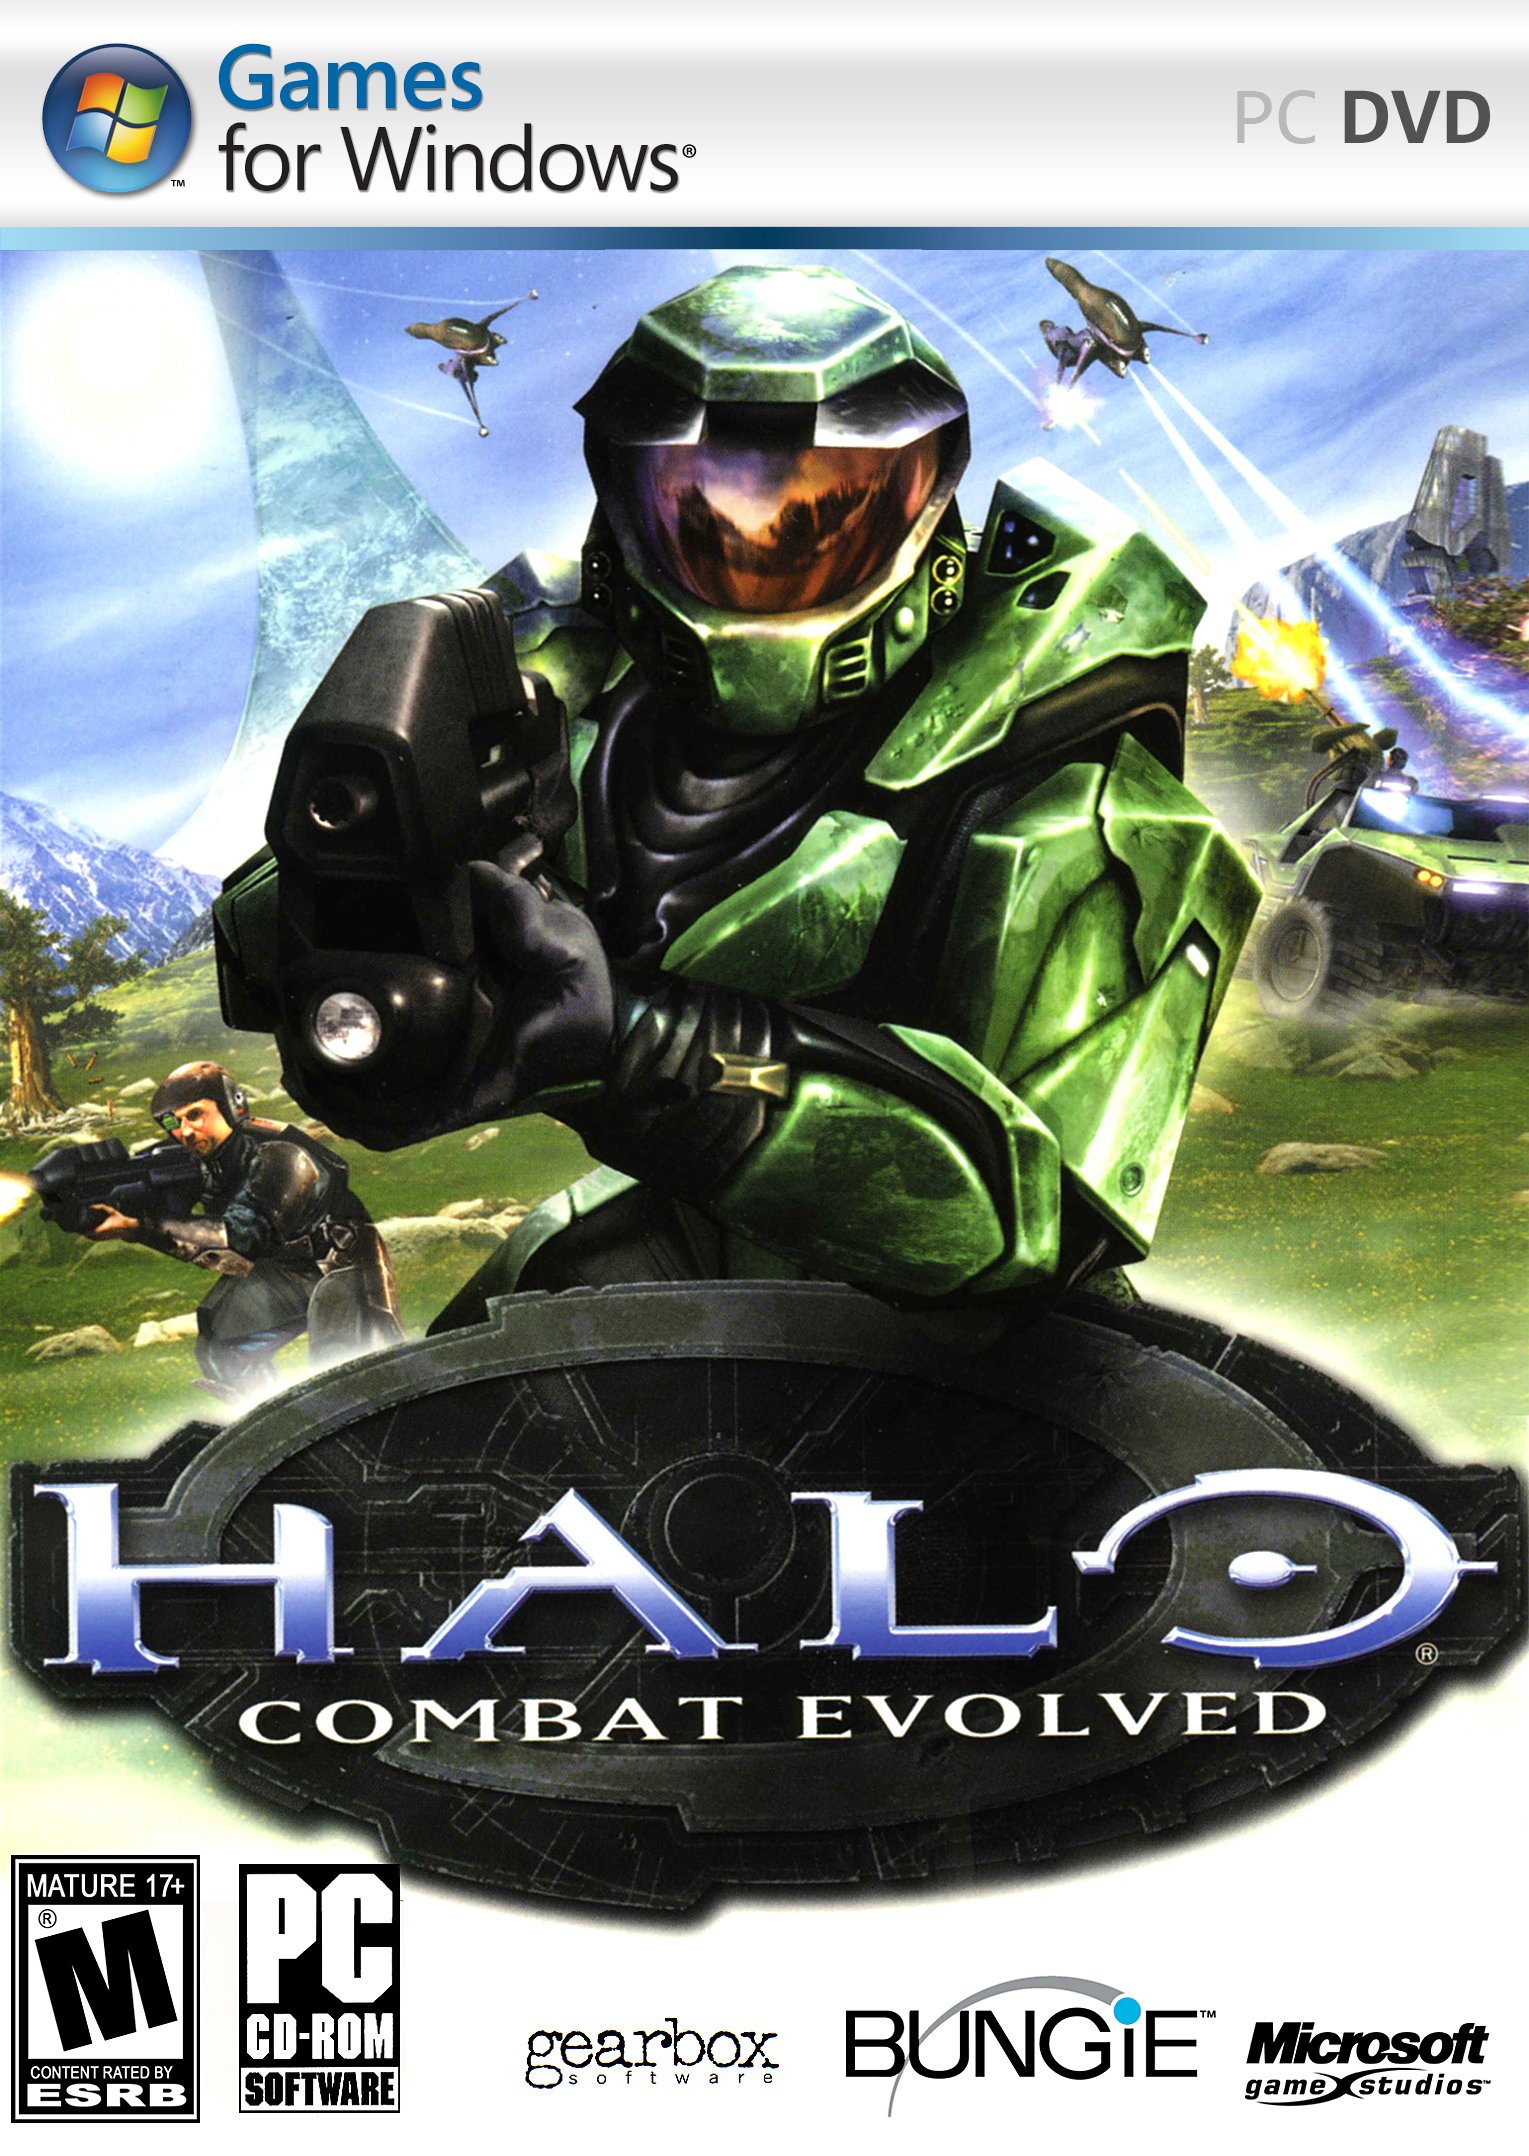 product key for halo 2 pc game